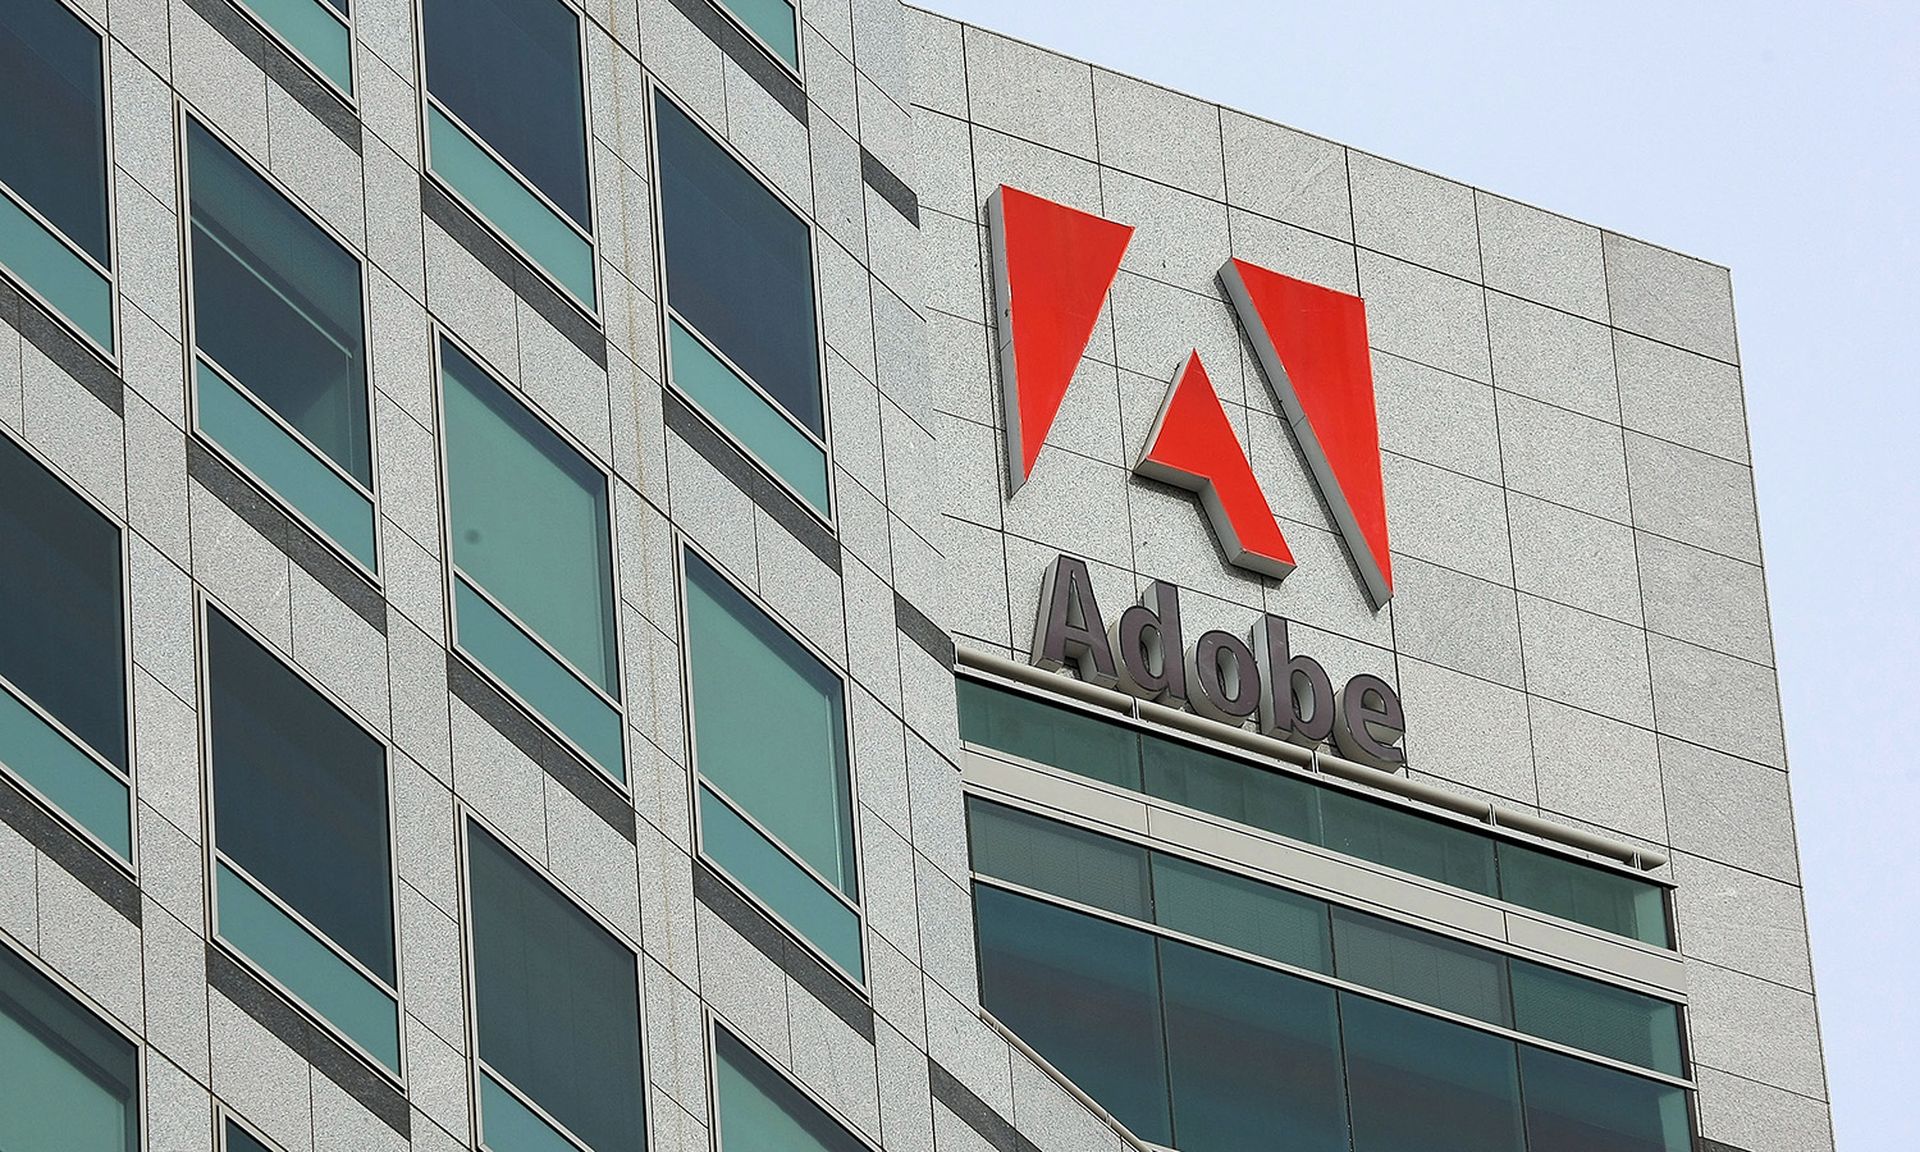 Adobe released an emergency patch for a critical vulnerability in its Magento 2 e-commerce platform. Pictured: The Adobe logo is displayed on the side of the Adobe Systems headquarters Jan. 15, 2010, in San Jose, Calif. (Photo by Justin Sullivan/Getty Images)